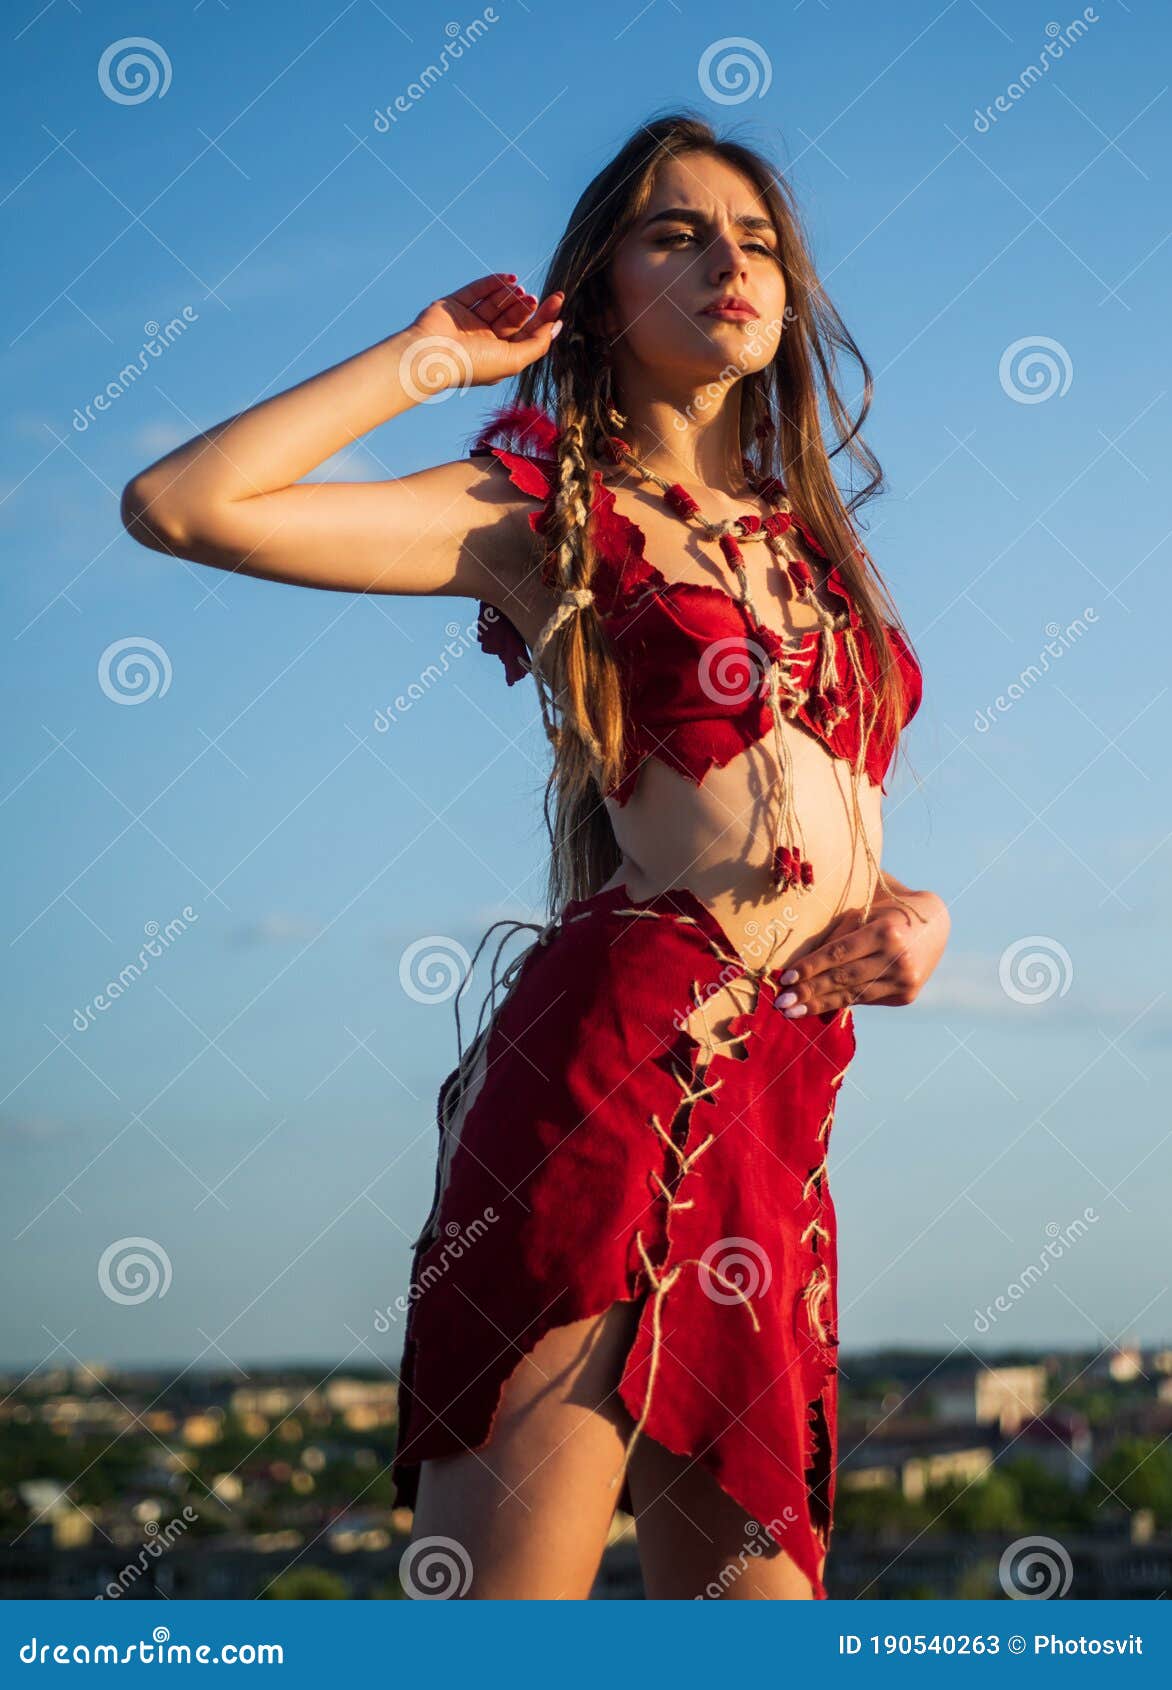 https://thumbs.dreamstime.com/z/spiritual-development-woman-wear-leather-clothes-sky-background-ethnic-tribal-concept-sexy-girl-tribal-clothing-tribal-culture-190540263.jpg